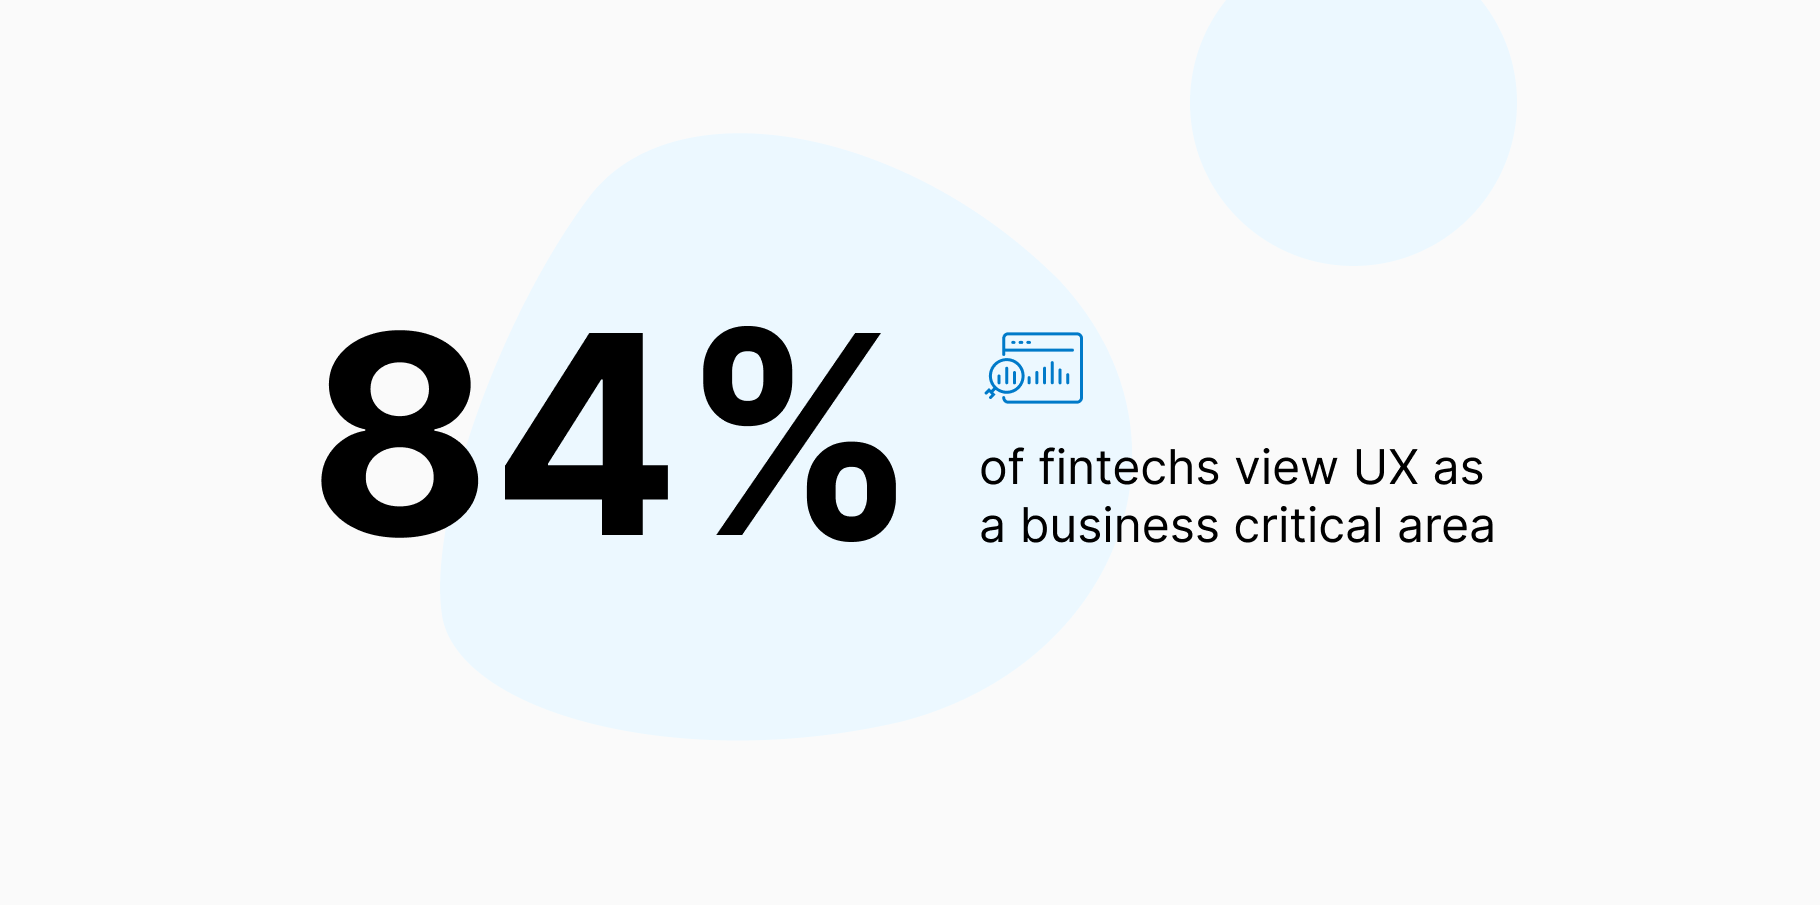 84% of fintechs view UX as a business critical area